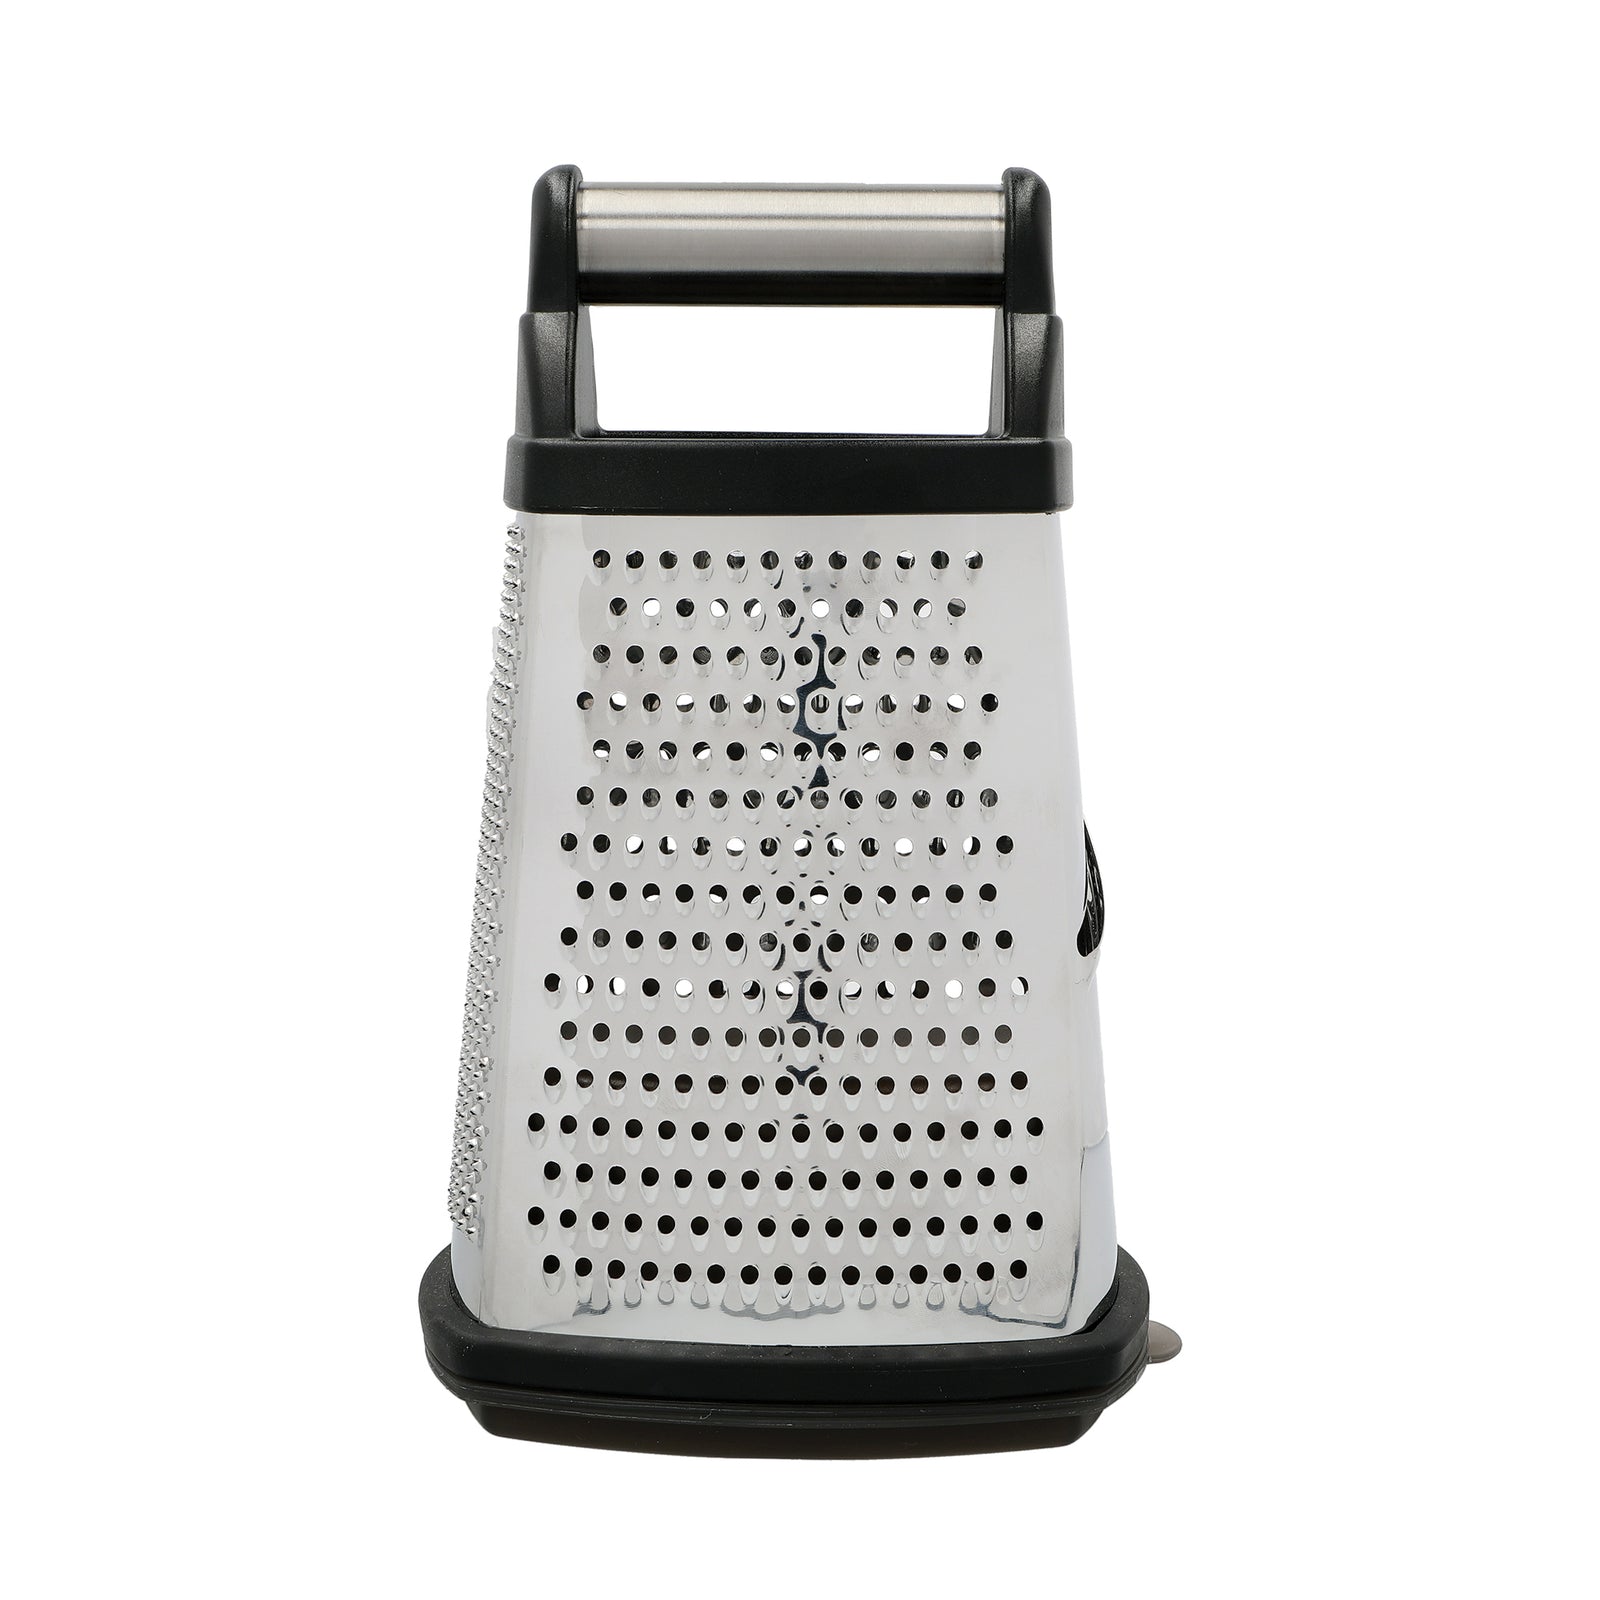 Universal Box Grater With Measuring Cups - Stainless Steel